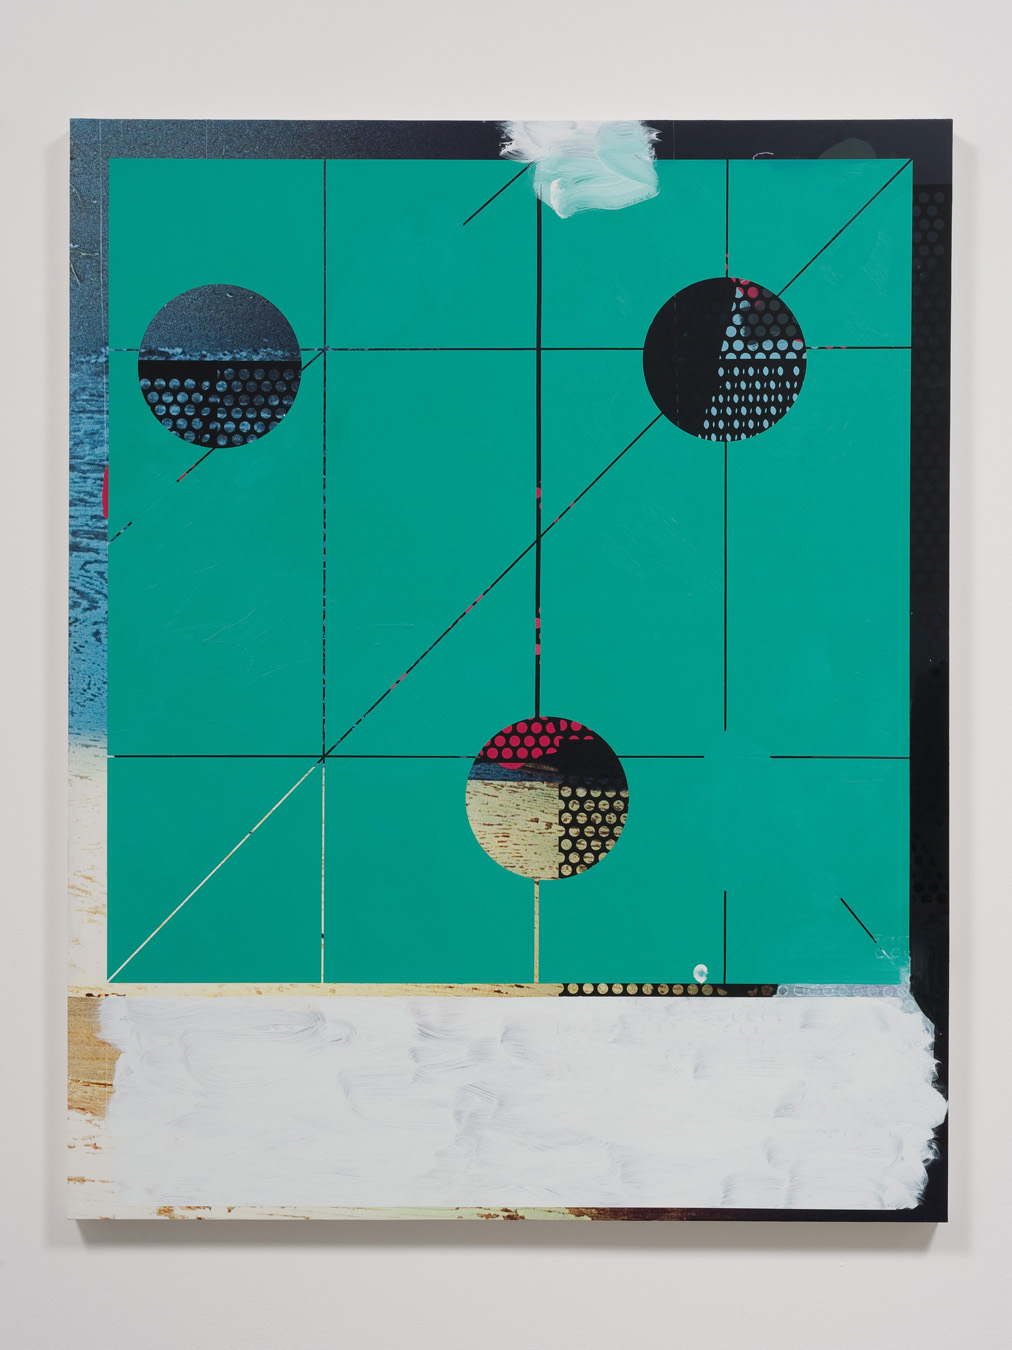  Salton Sea (wall), 2012  Acrylic, oil and UV cured ink on canvas over panel  60 x 48 inches  152.4 x 121.92 cm       